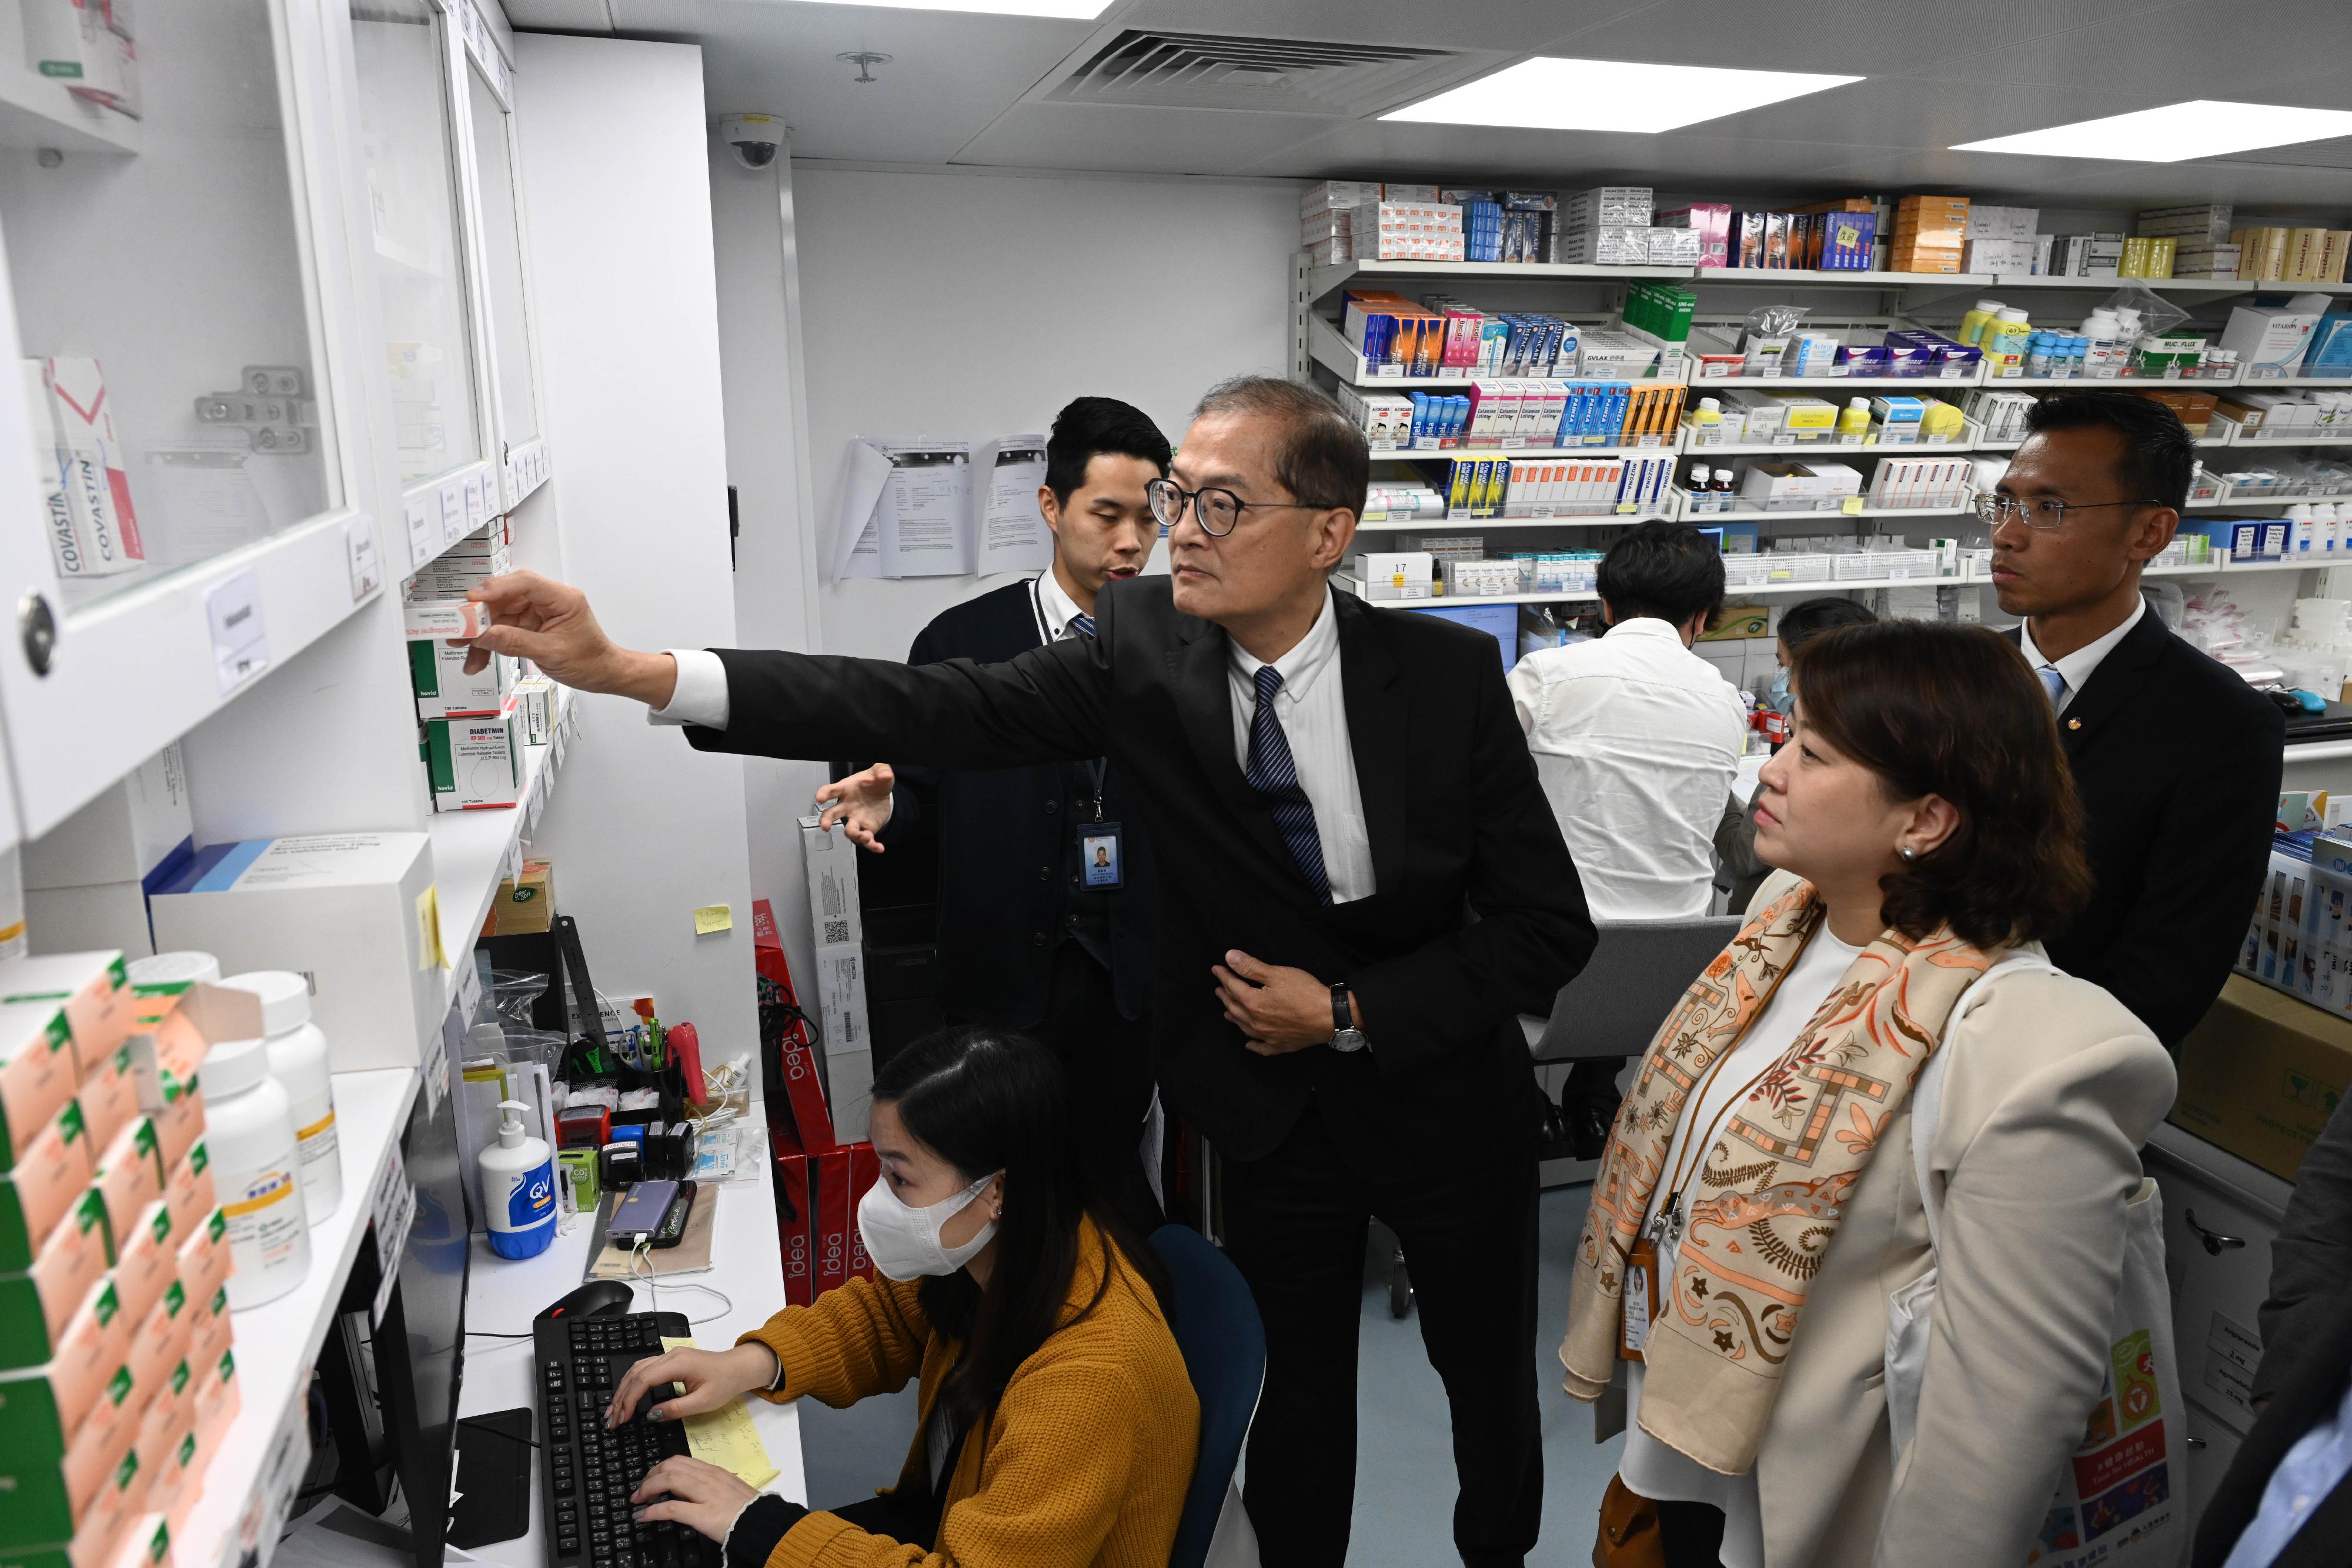 The Secretary for Health, Professor Lo Chung-mau (centre), and the Under Secretary for Health, Dr Libby Lee (second right), visited Yau Tsim Mong District Health Centre (DHC) Express this afternoon (April 4), followed by a tour of the Lok Sin Tong Mr. & Mrs. Lee Yin Yee Community Pharmacy in the company of the representative of the operator of the DHC Express, the Chairman of the Lok Sin Tong Benevolent Society, Kowloon, Mr Lee Shing-kan (first right), to learn about the daily collaboration between the DHC Express and the pharmacy.